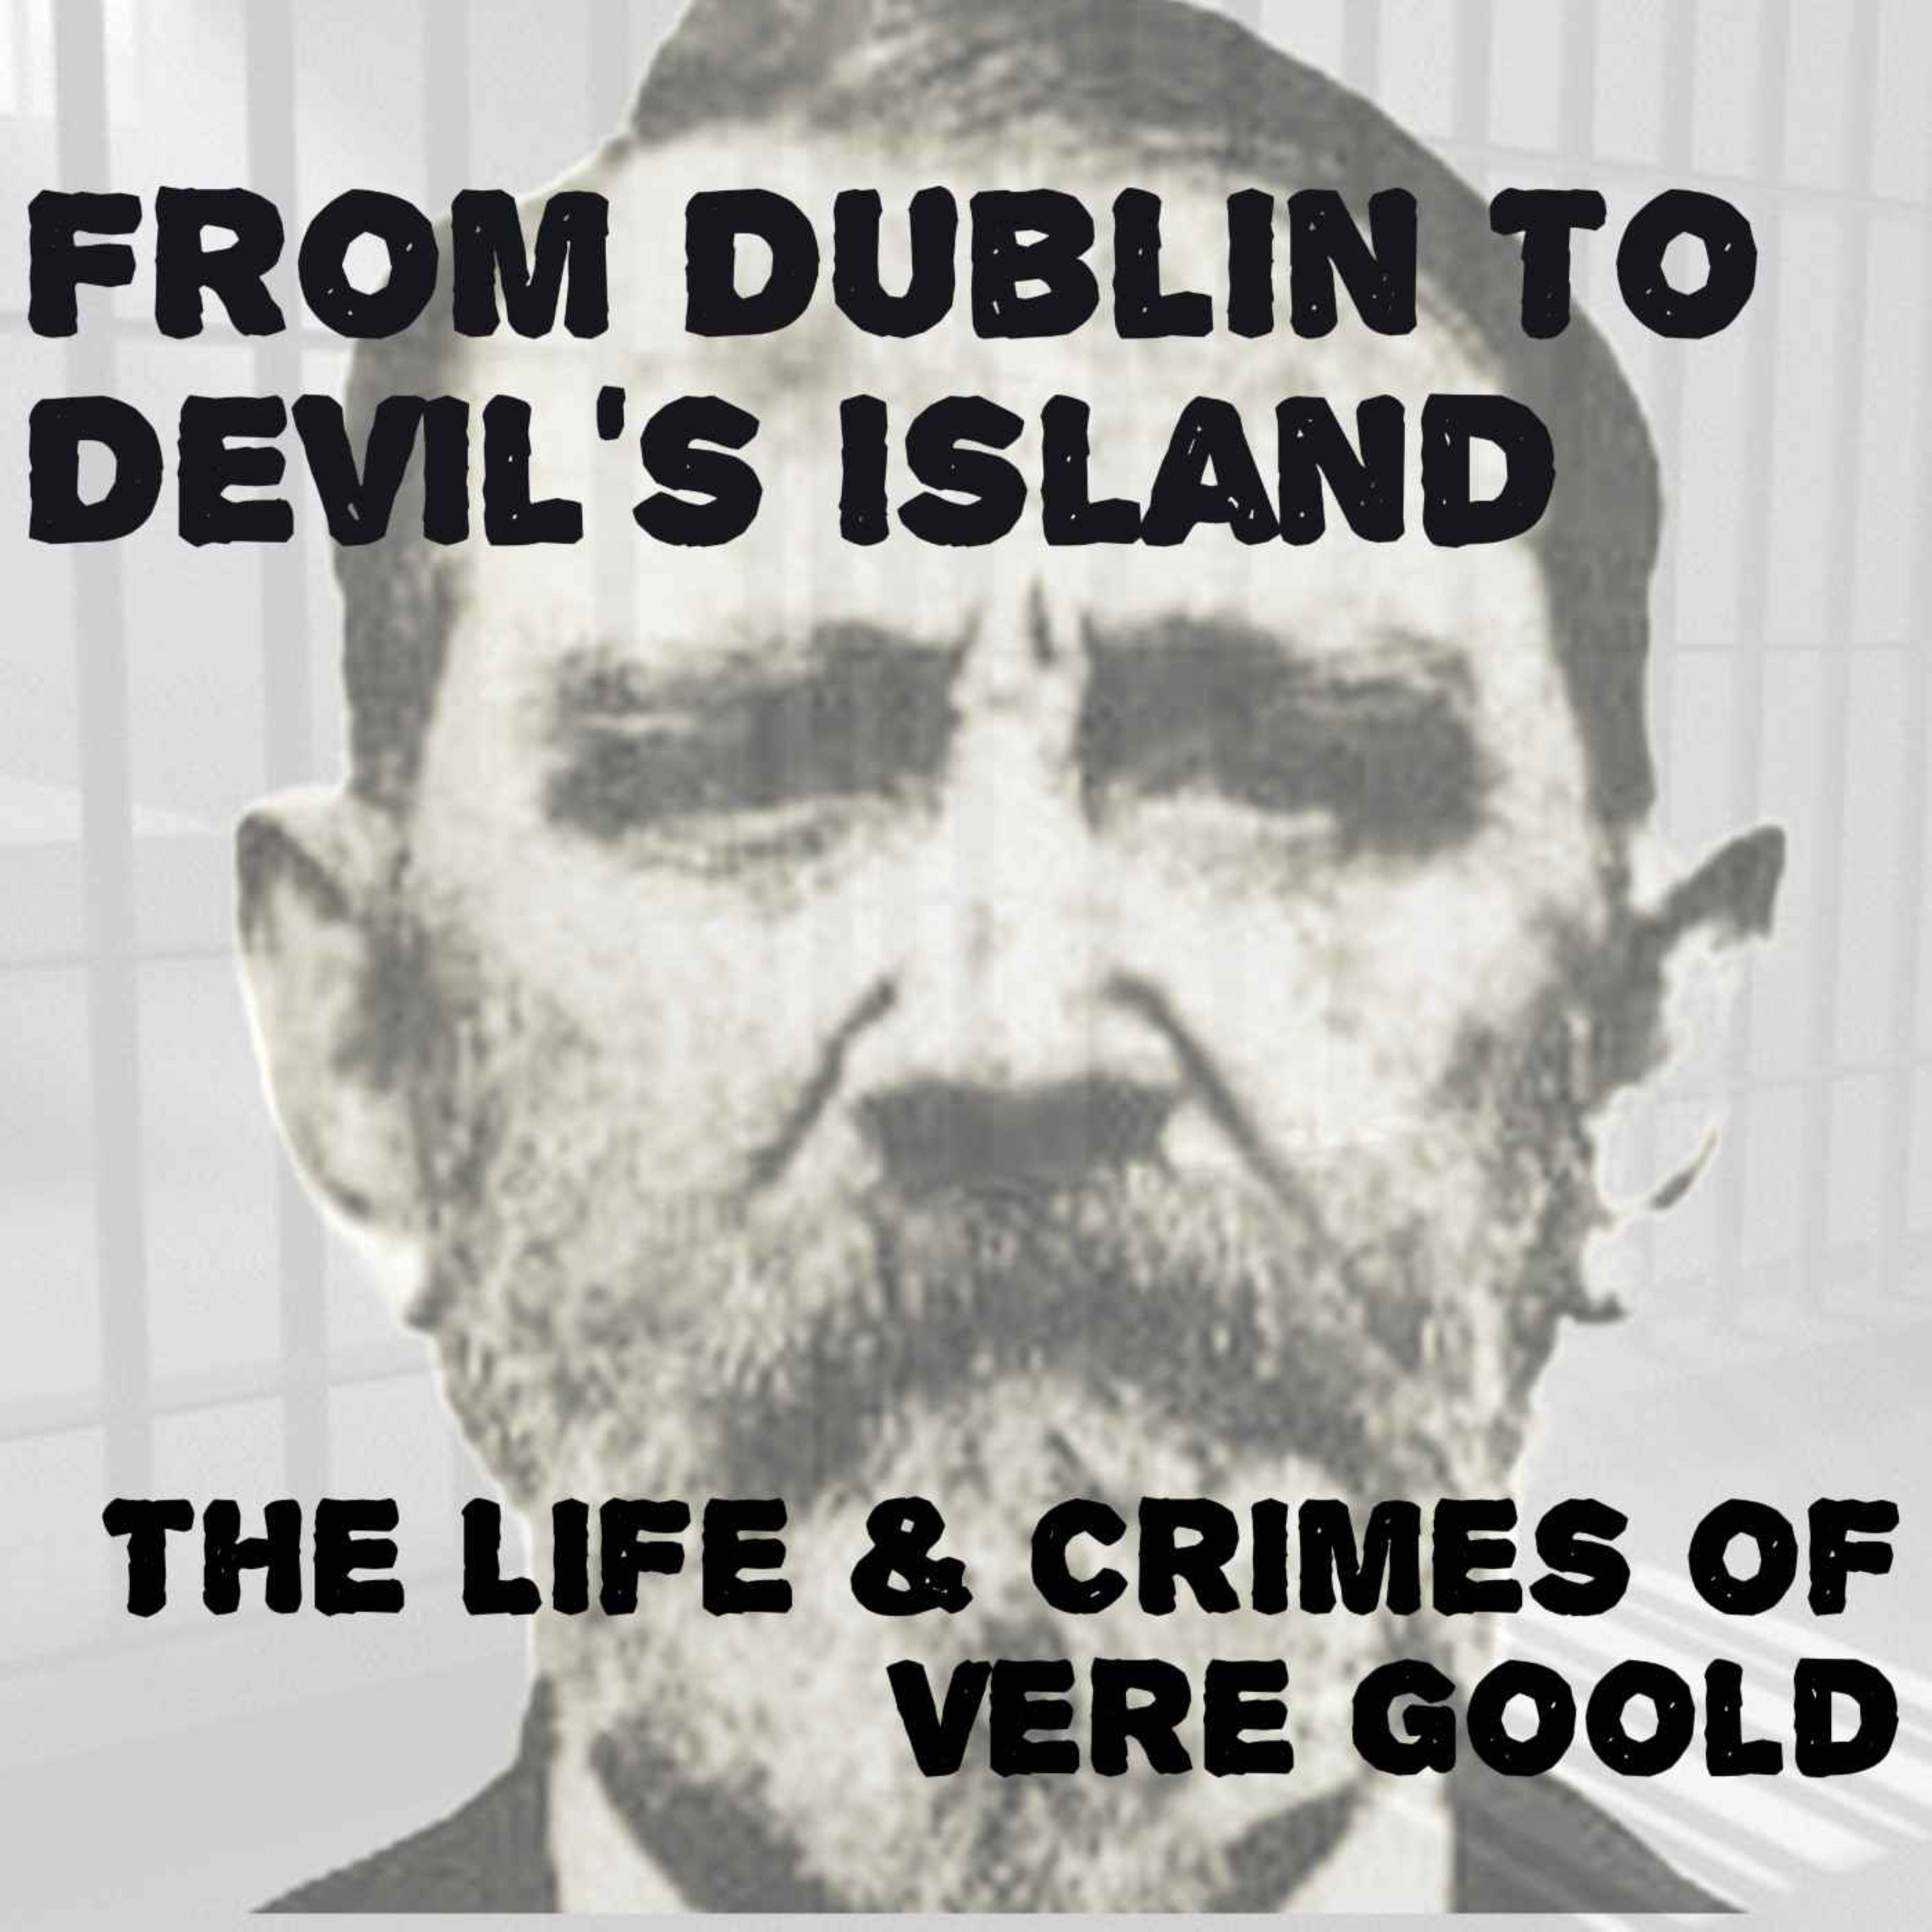 From Dublin to Devil's Island - The Life & Crimes of Vere Goold